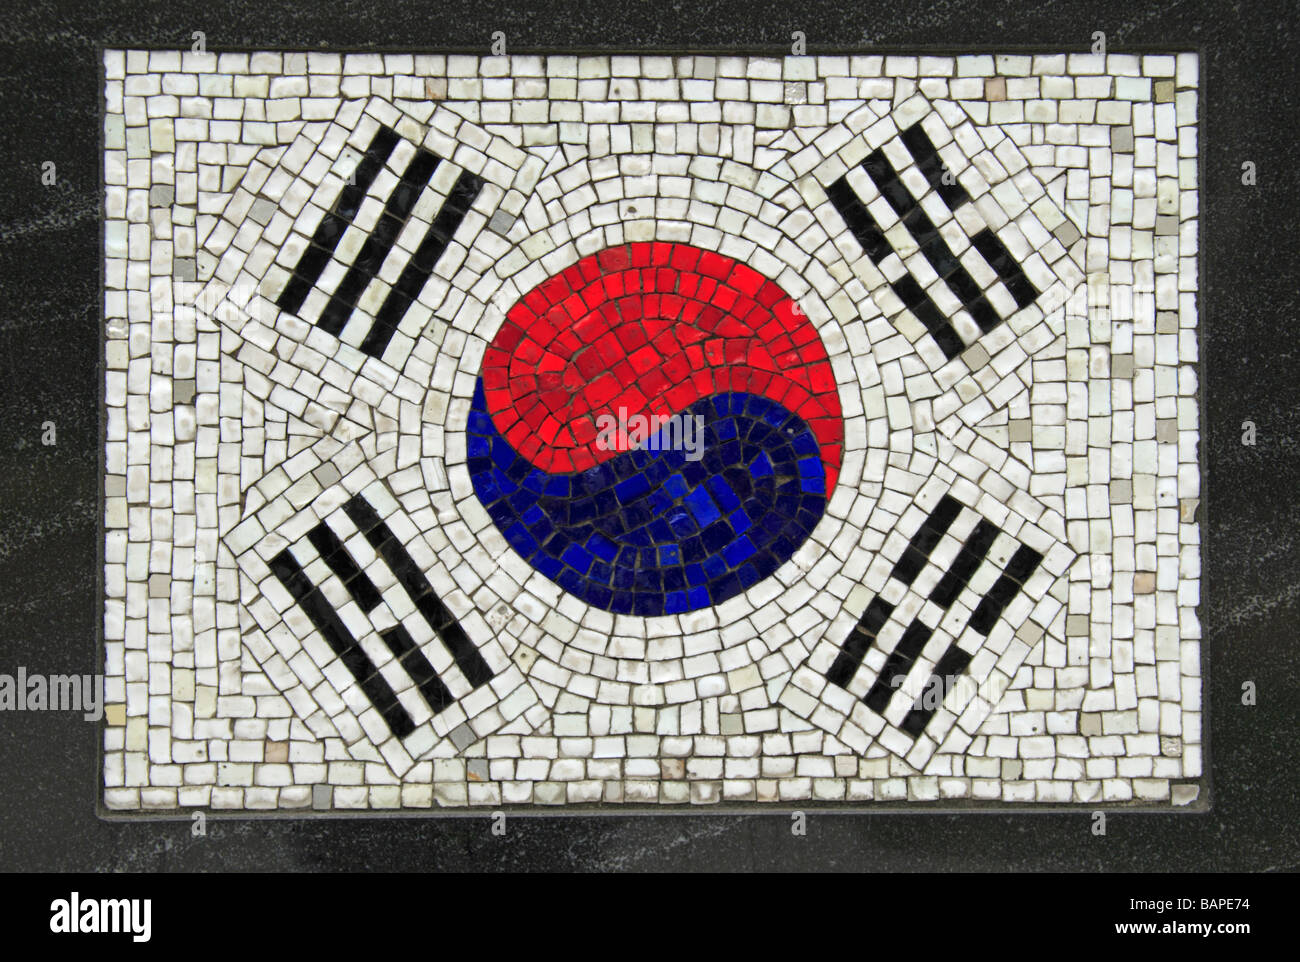 A mosaic of the Korean flag below 'The Universal Soldier', the Korean Veterans Memorial, Battery Park, New York, United States. Stock Photo